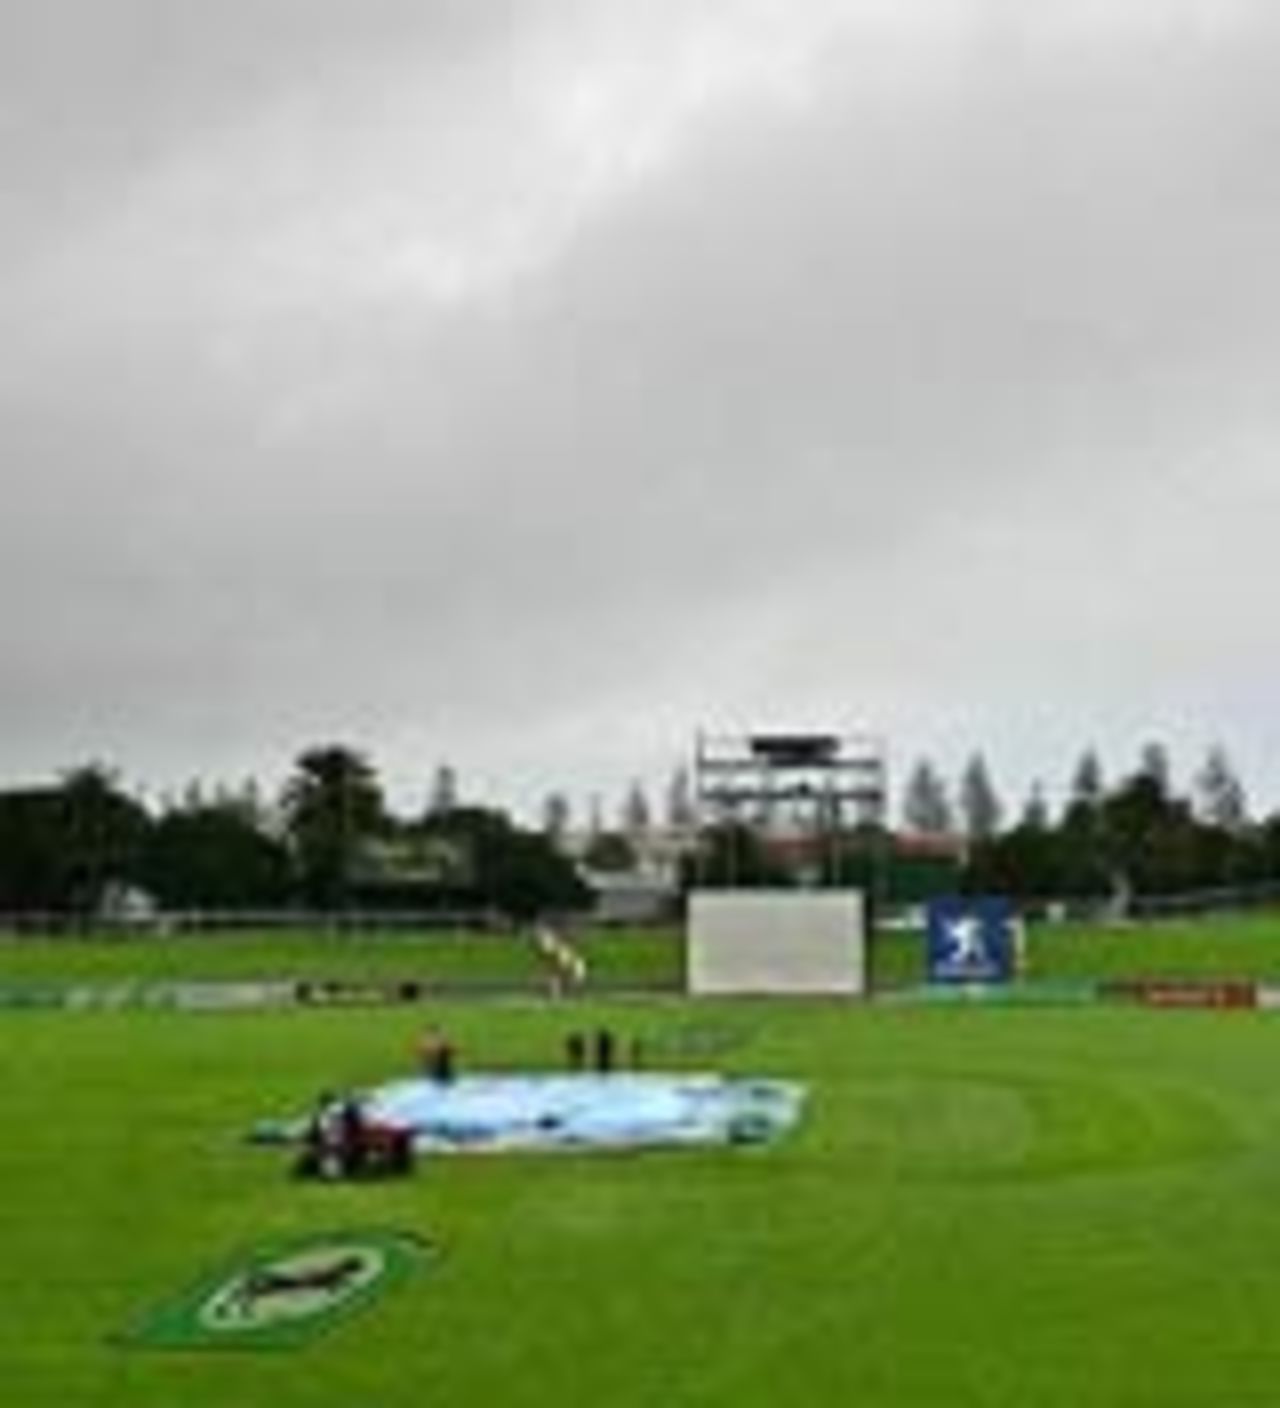 Rain washed out play on the third day at Napier, New Zealand v West Indies, 3rd Test, Napier, 3rd day, March 27, 2006